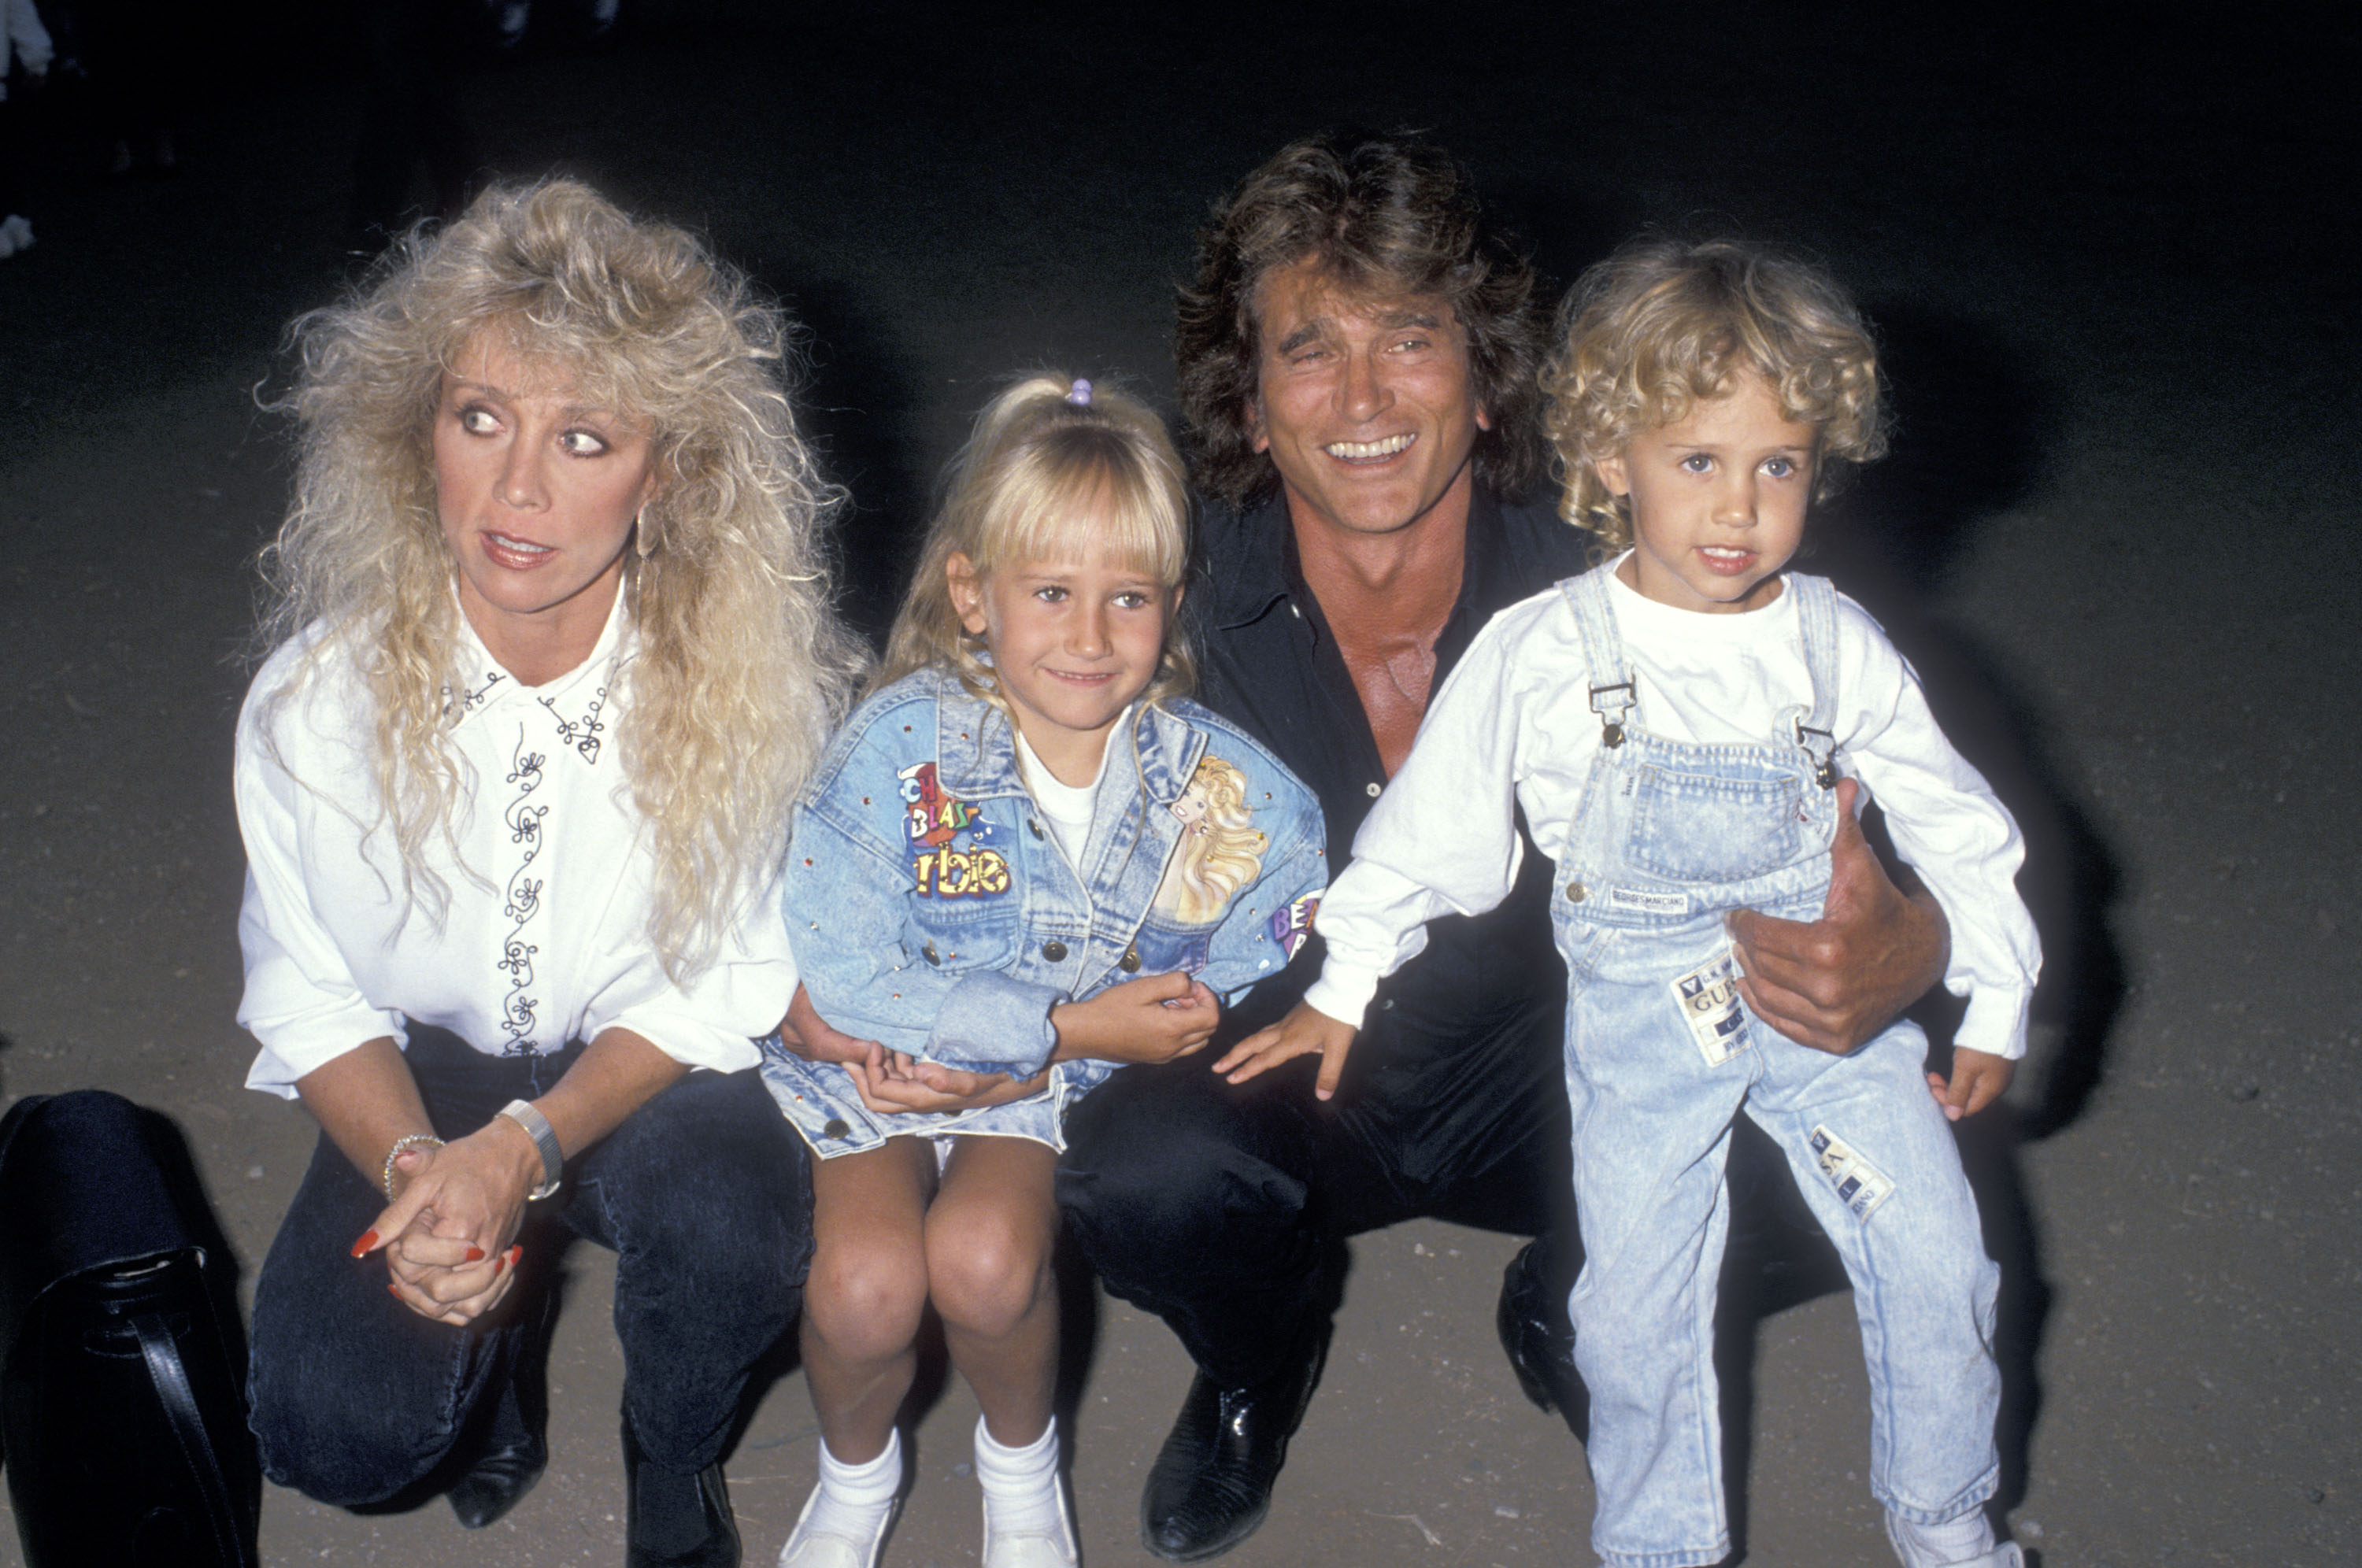 MALIBU,CA - JULY 29: Actor Michael Landon, wife Cindy Landon, daughter Jennifer Landon and son Sean Landon attend the Third Annual Moonlight Roundup Extravaganza to Benefit Free Arts for Abused Children on July 29, 1989 at the Calamigos Ranch in Malibu, California.